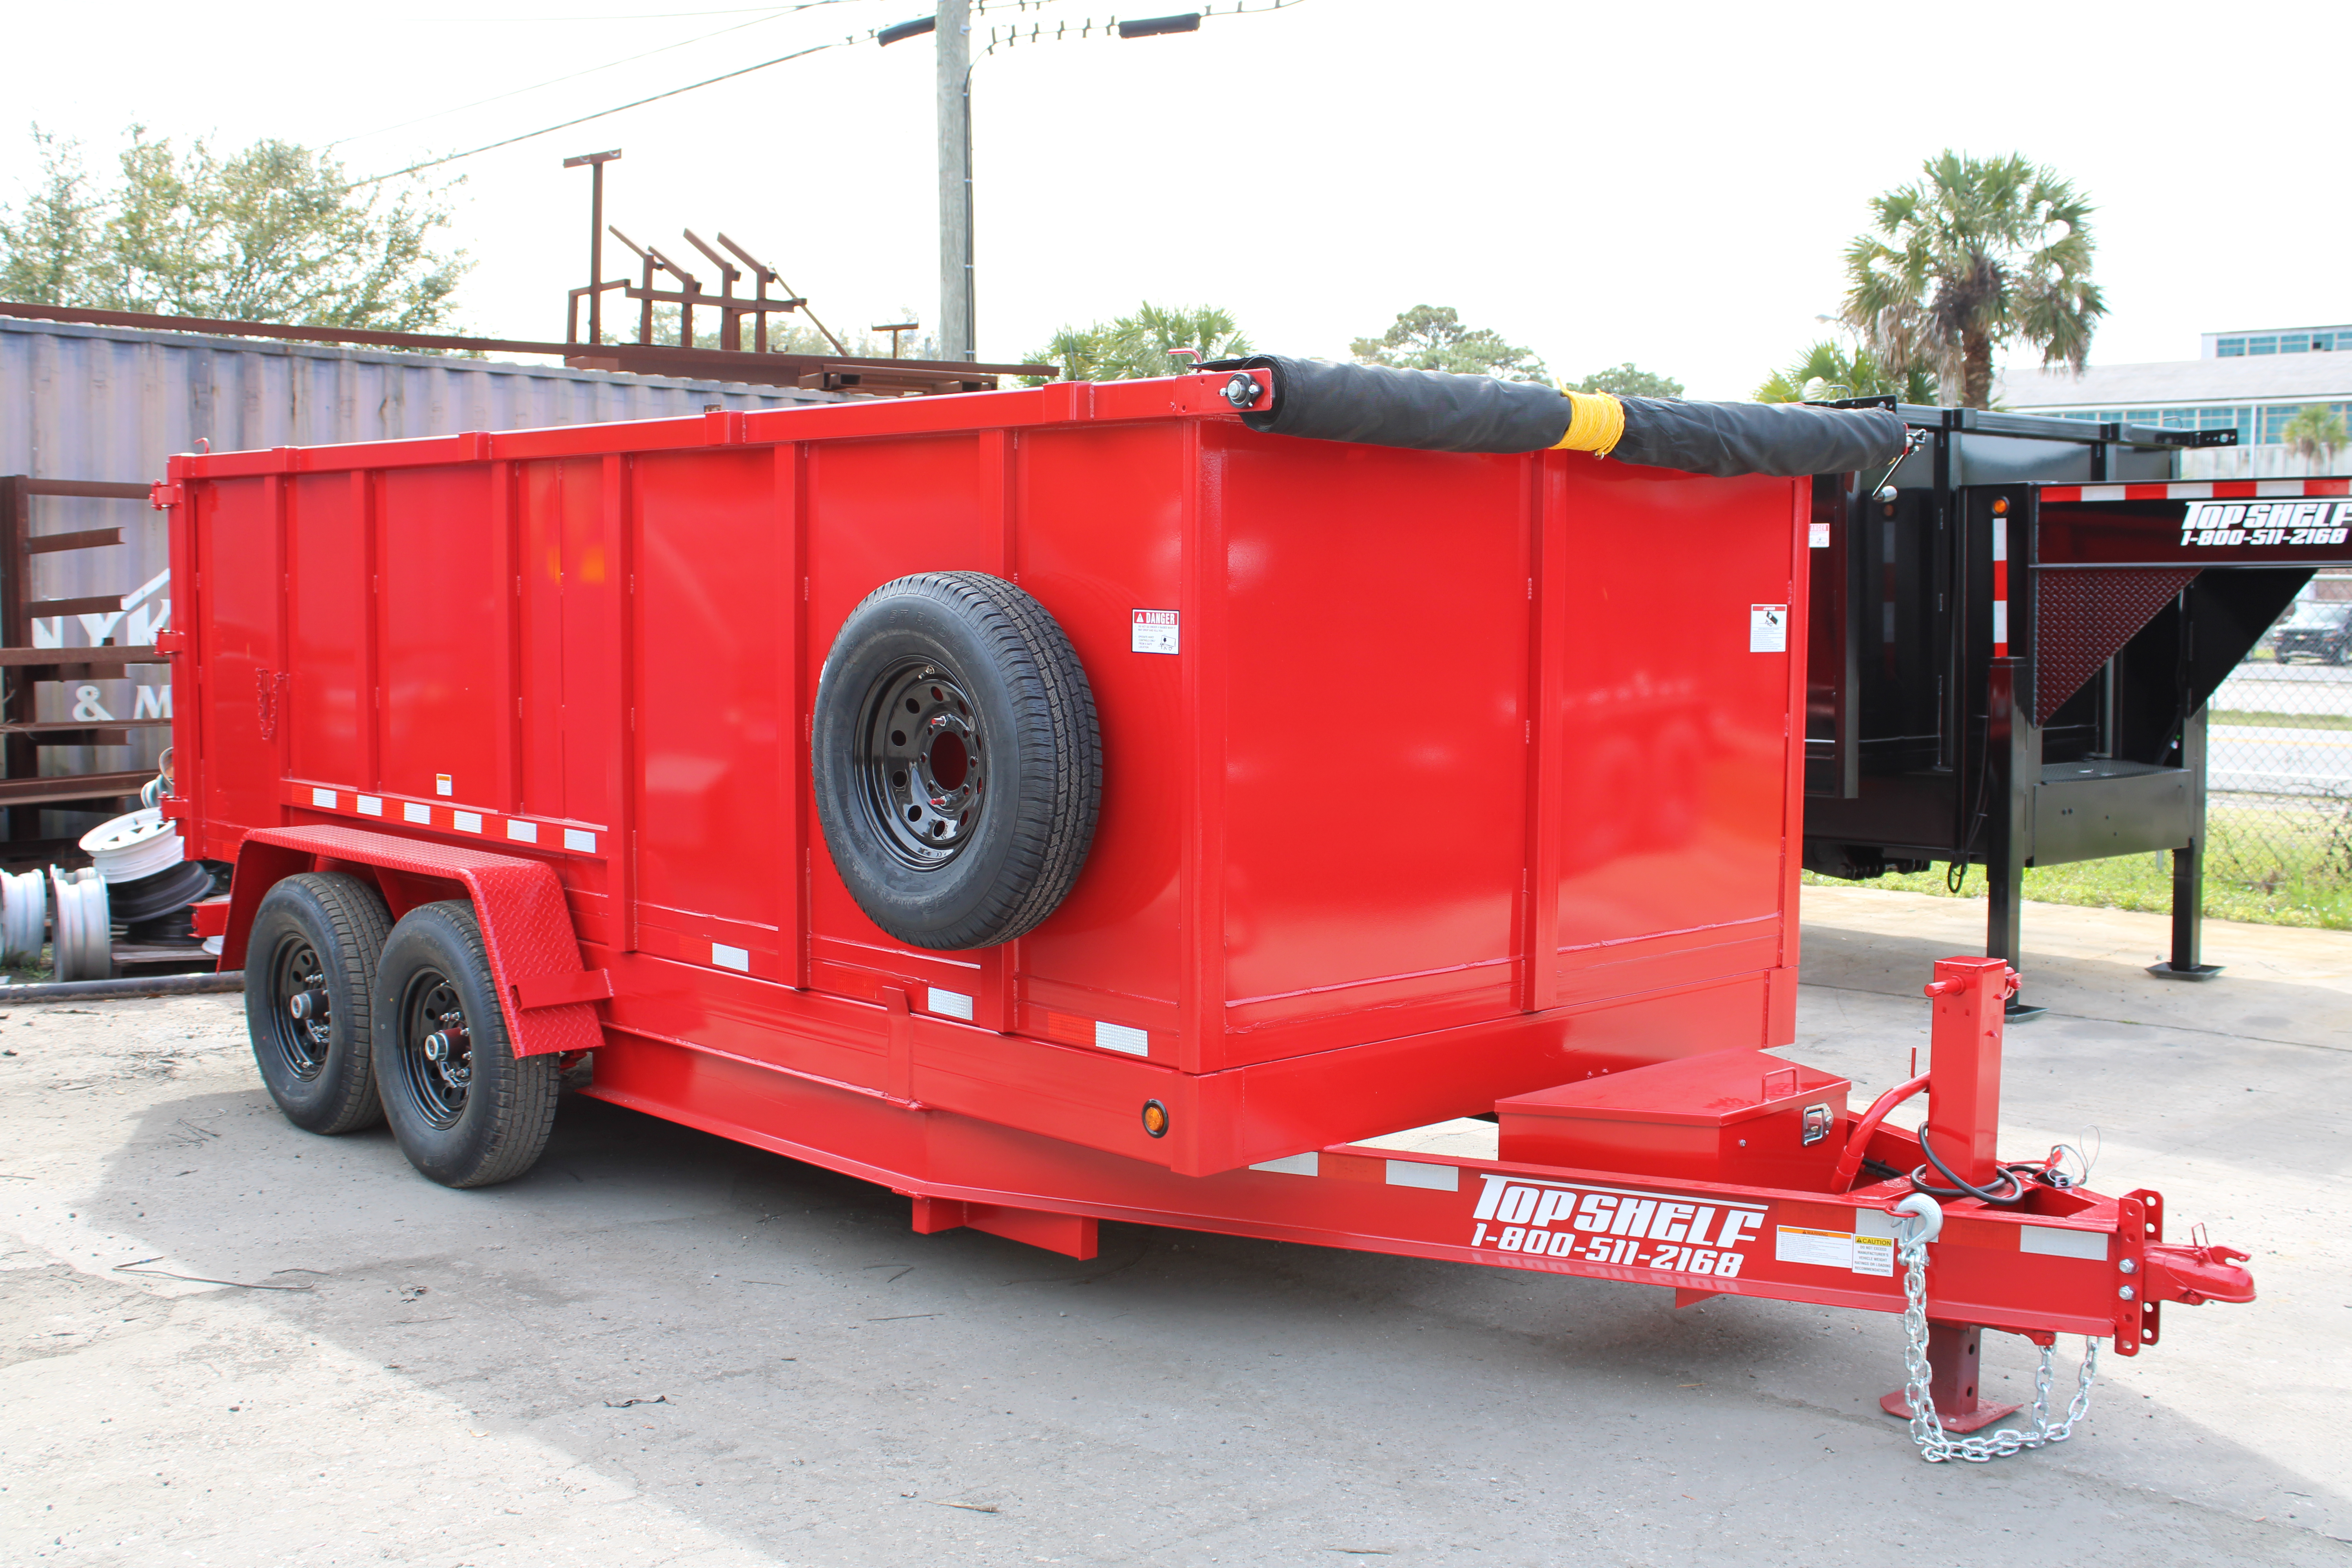 The Growing Demand for Affordable and Convenient Dump Trailer Rentals in the Local Market The Best Dump Trailers heavy duty dump trailer